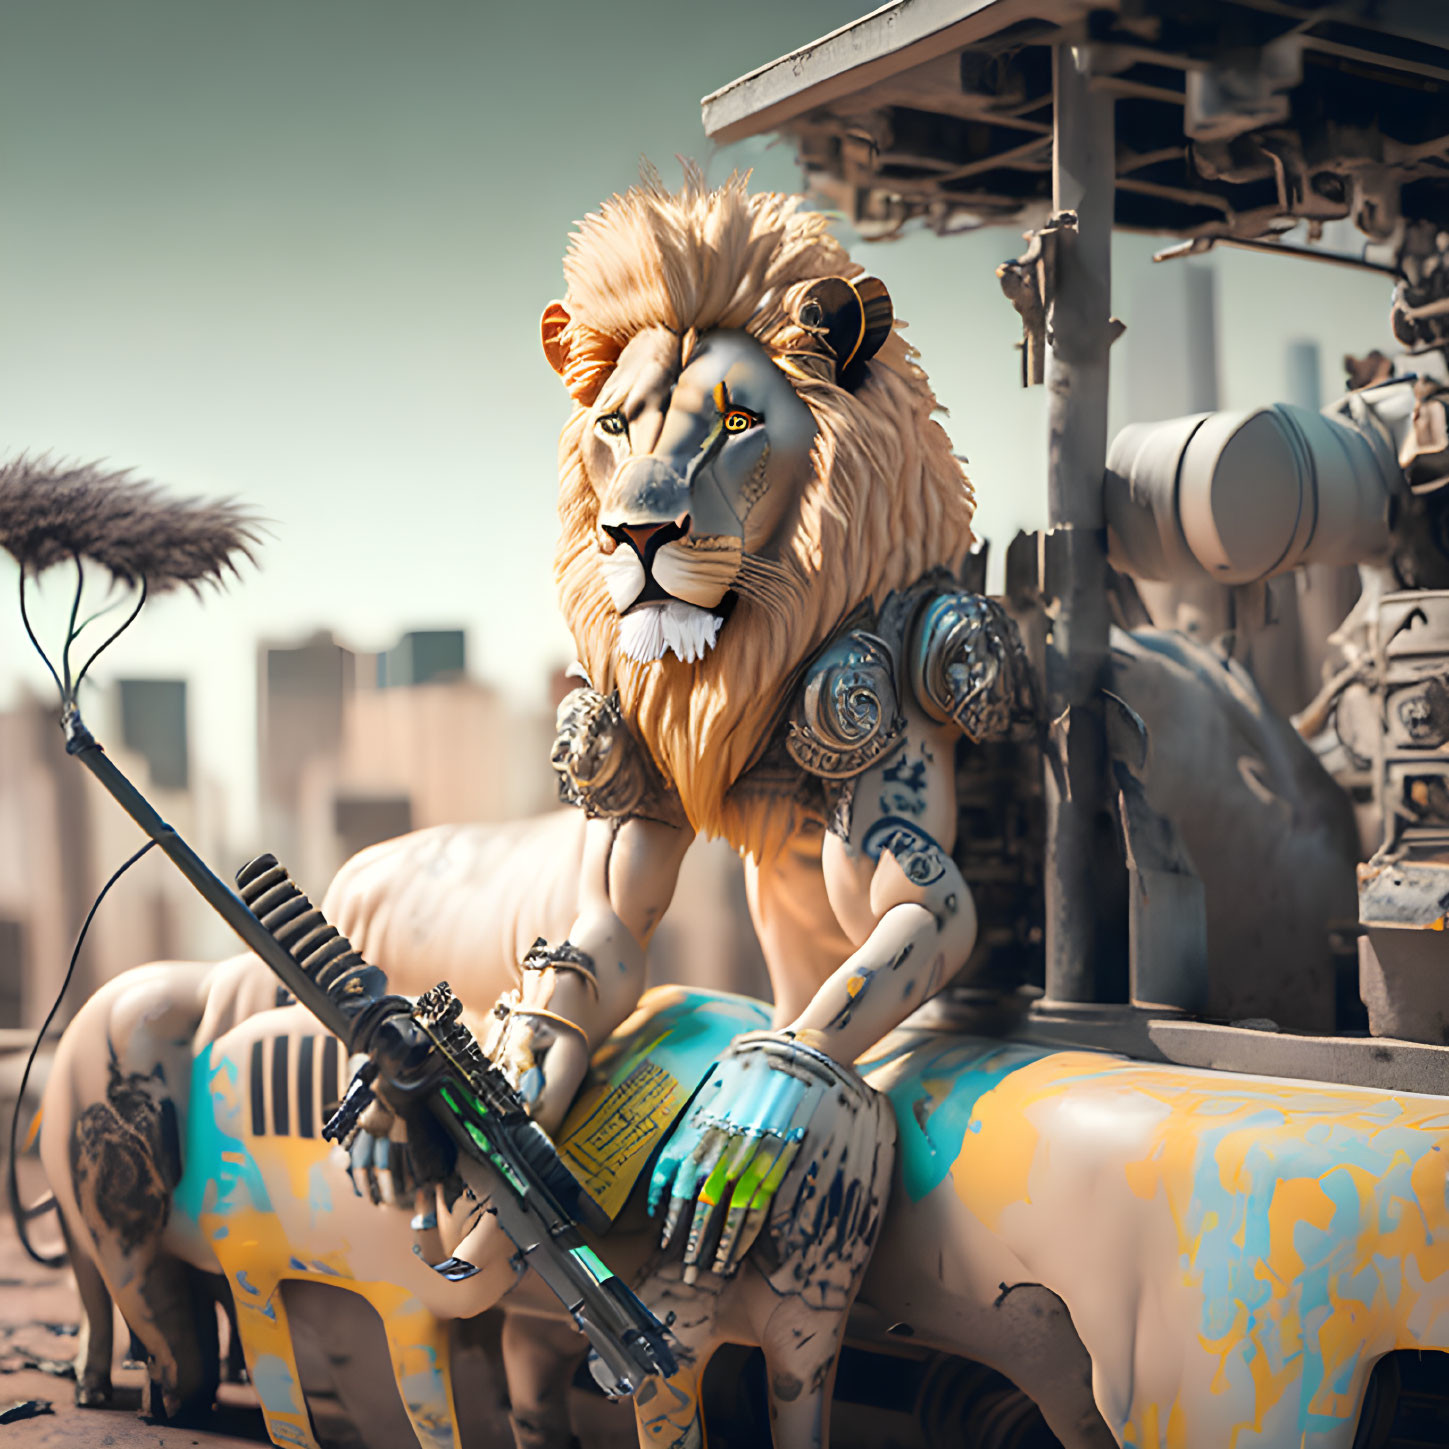 Mechanical lion with majestic mane holding rifle in futuristic urban decay.